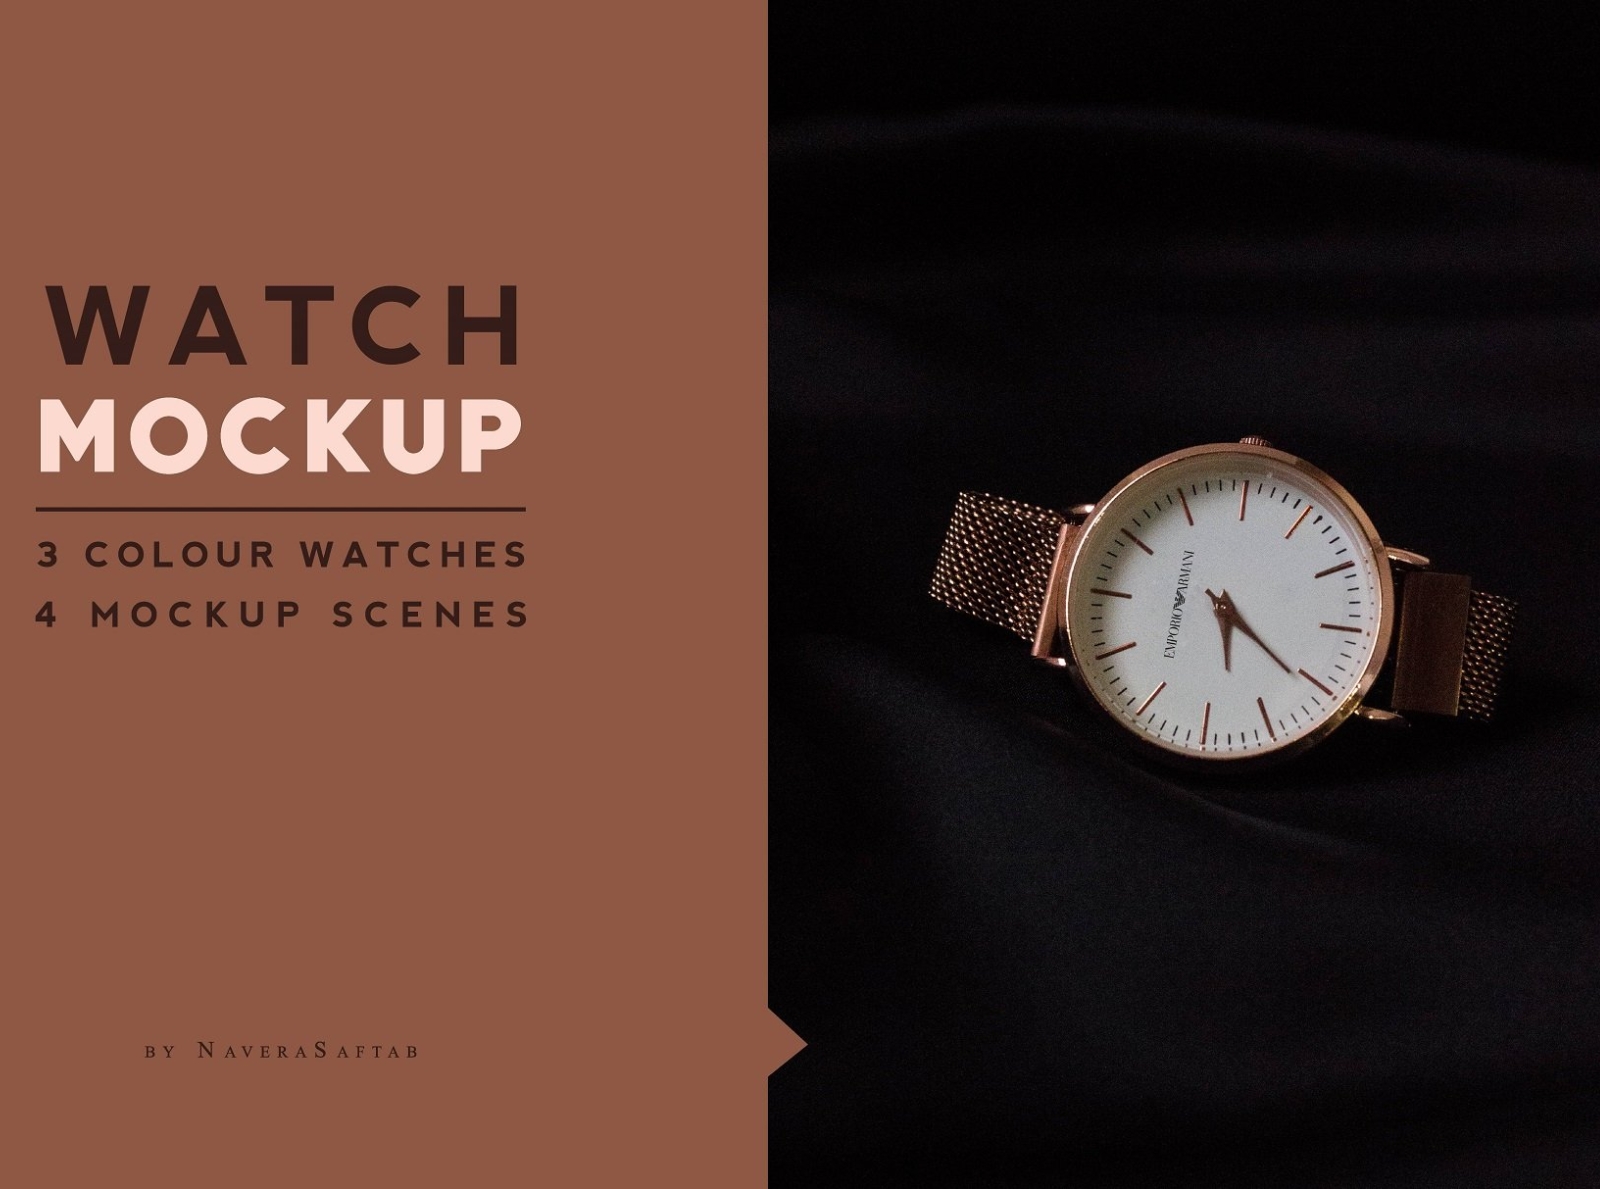 Download WATCH MOCKUP by Mockup5 on Dribbble